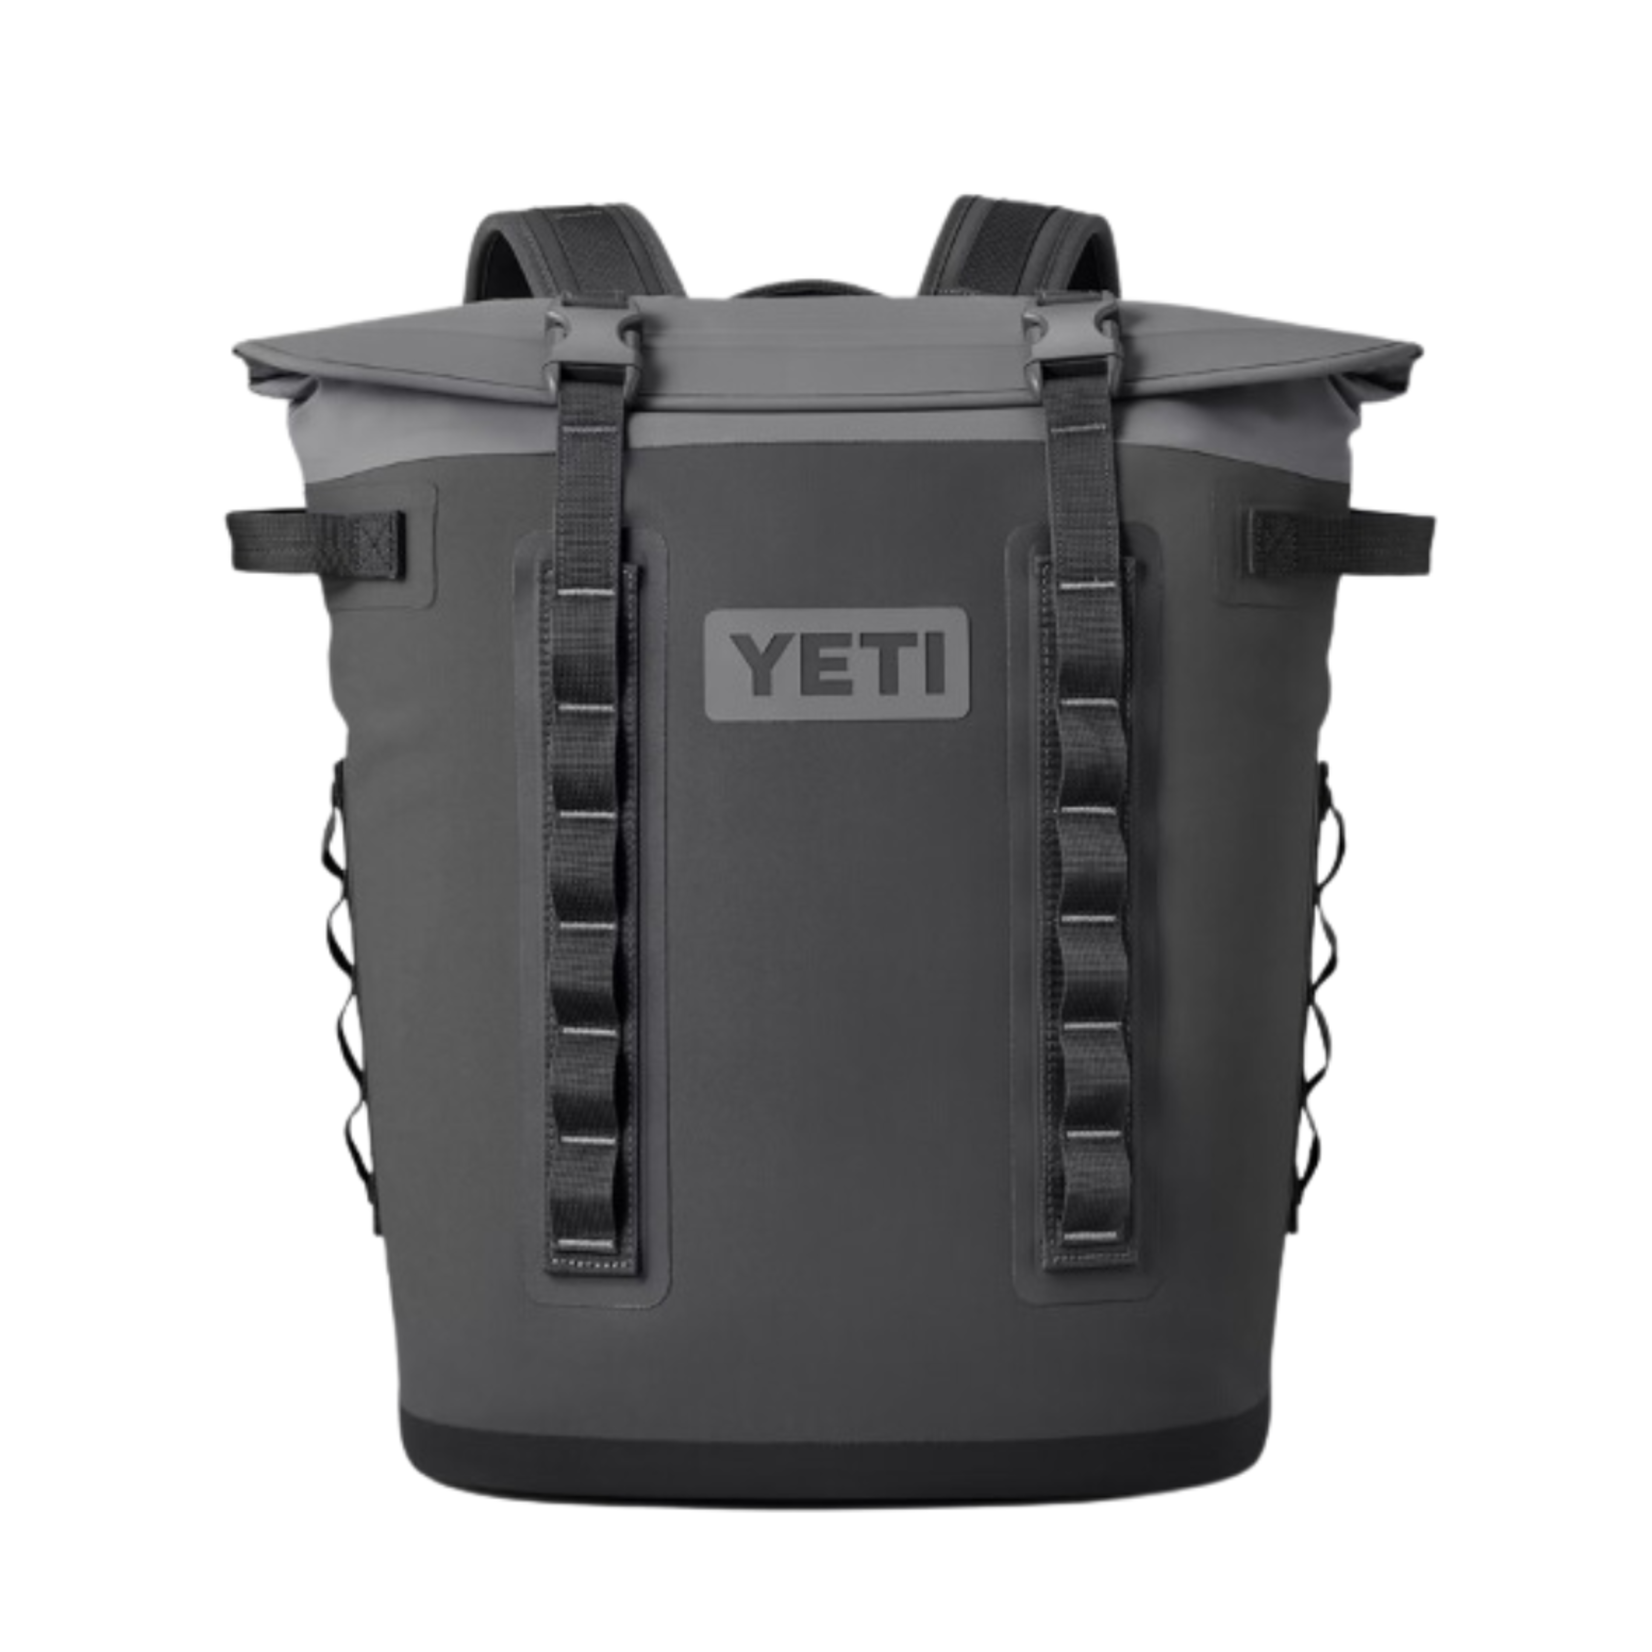 YETI M20 Backpack Cooler